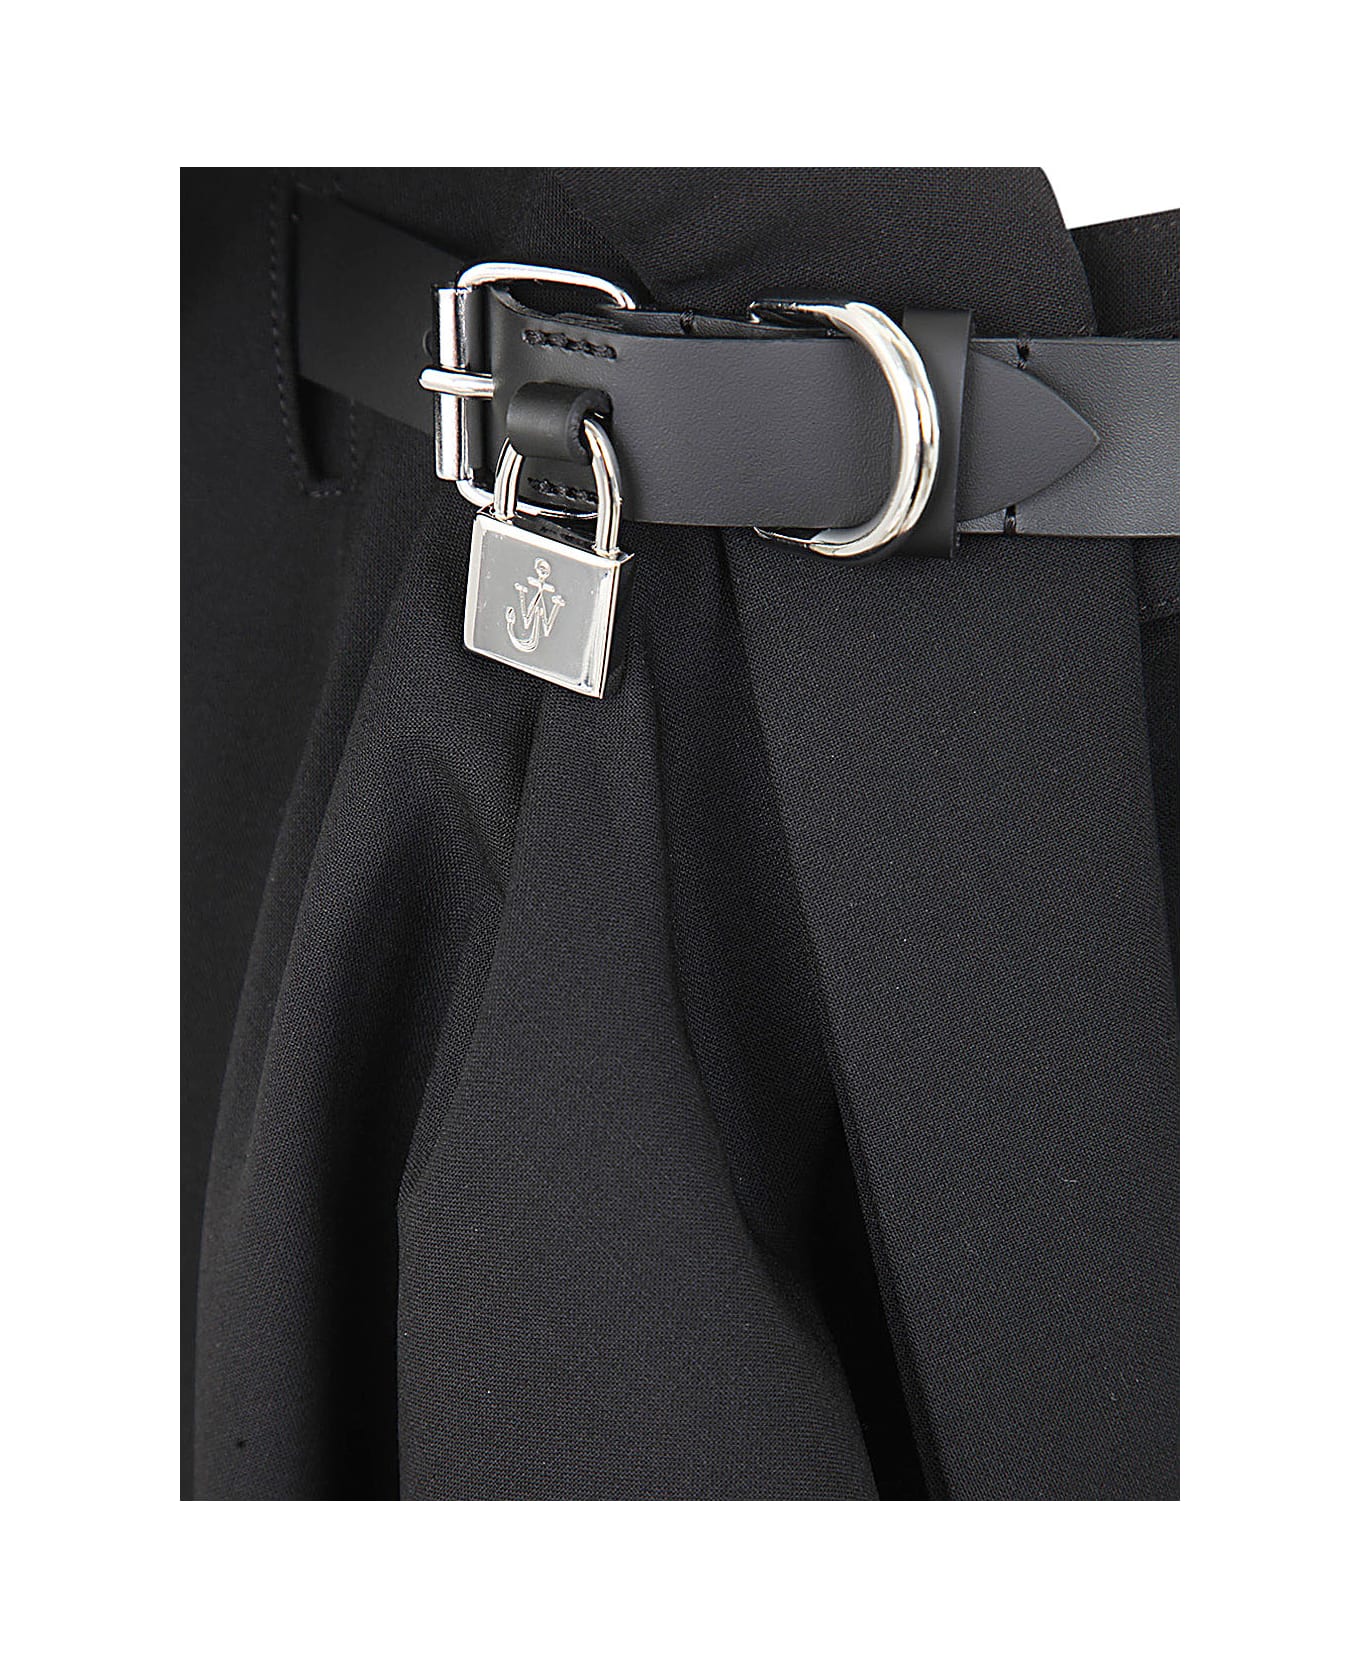 J.W. Anderson Padlock Strap Fold Over Trousers - Black